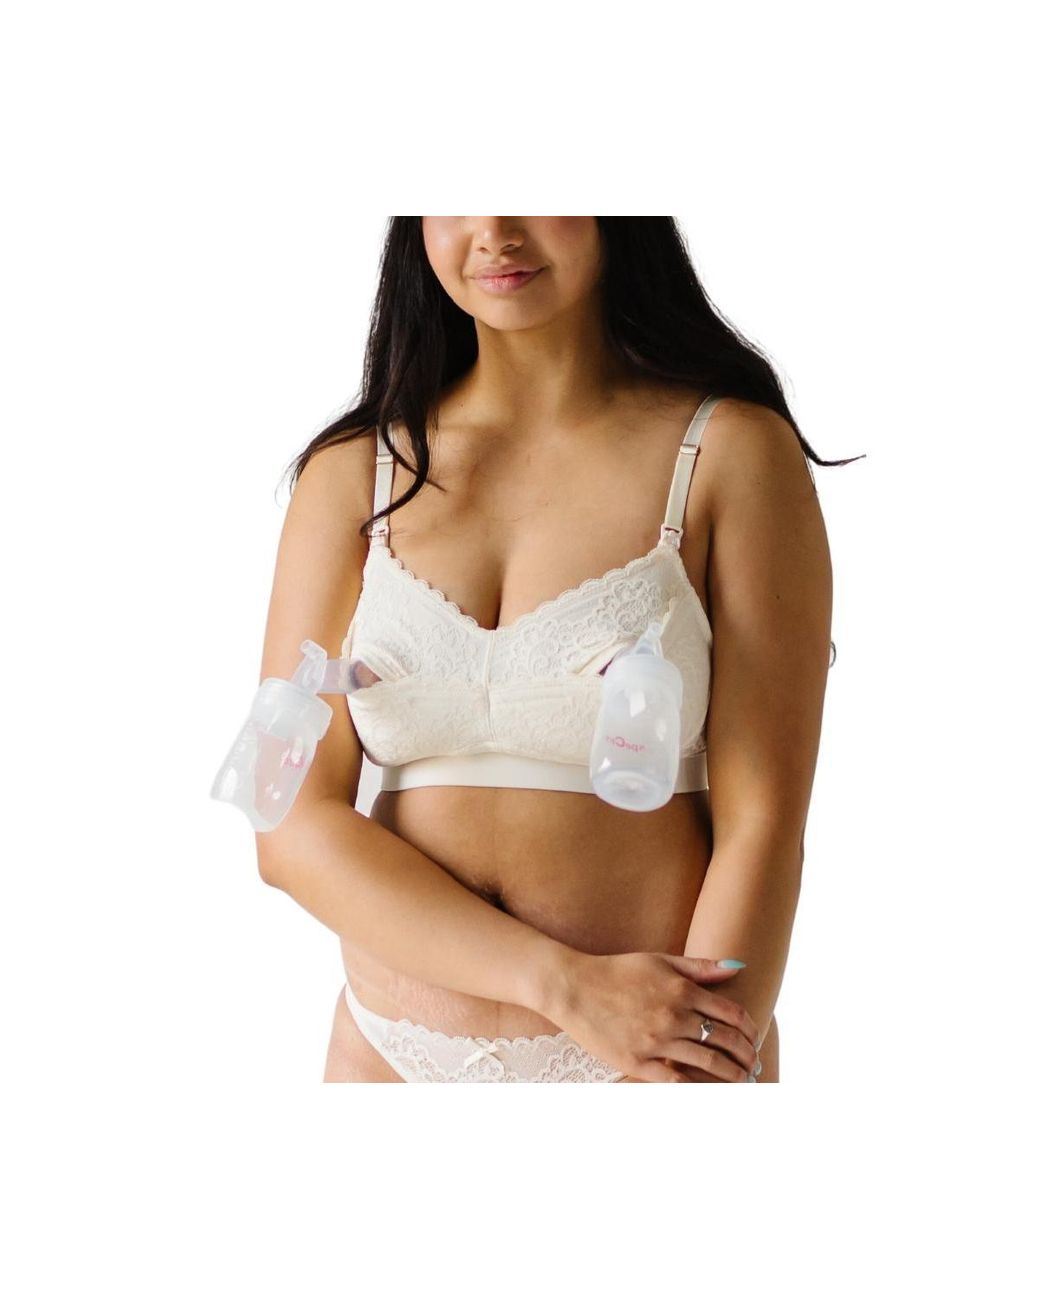 THE DAIRY FAIRY Pippa Nursing And Handsfree Pumping Bra in Brown